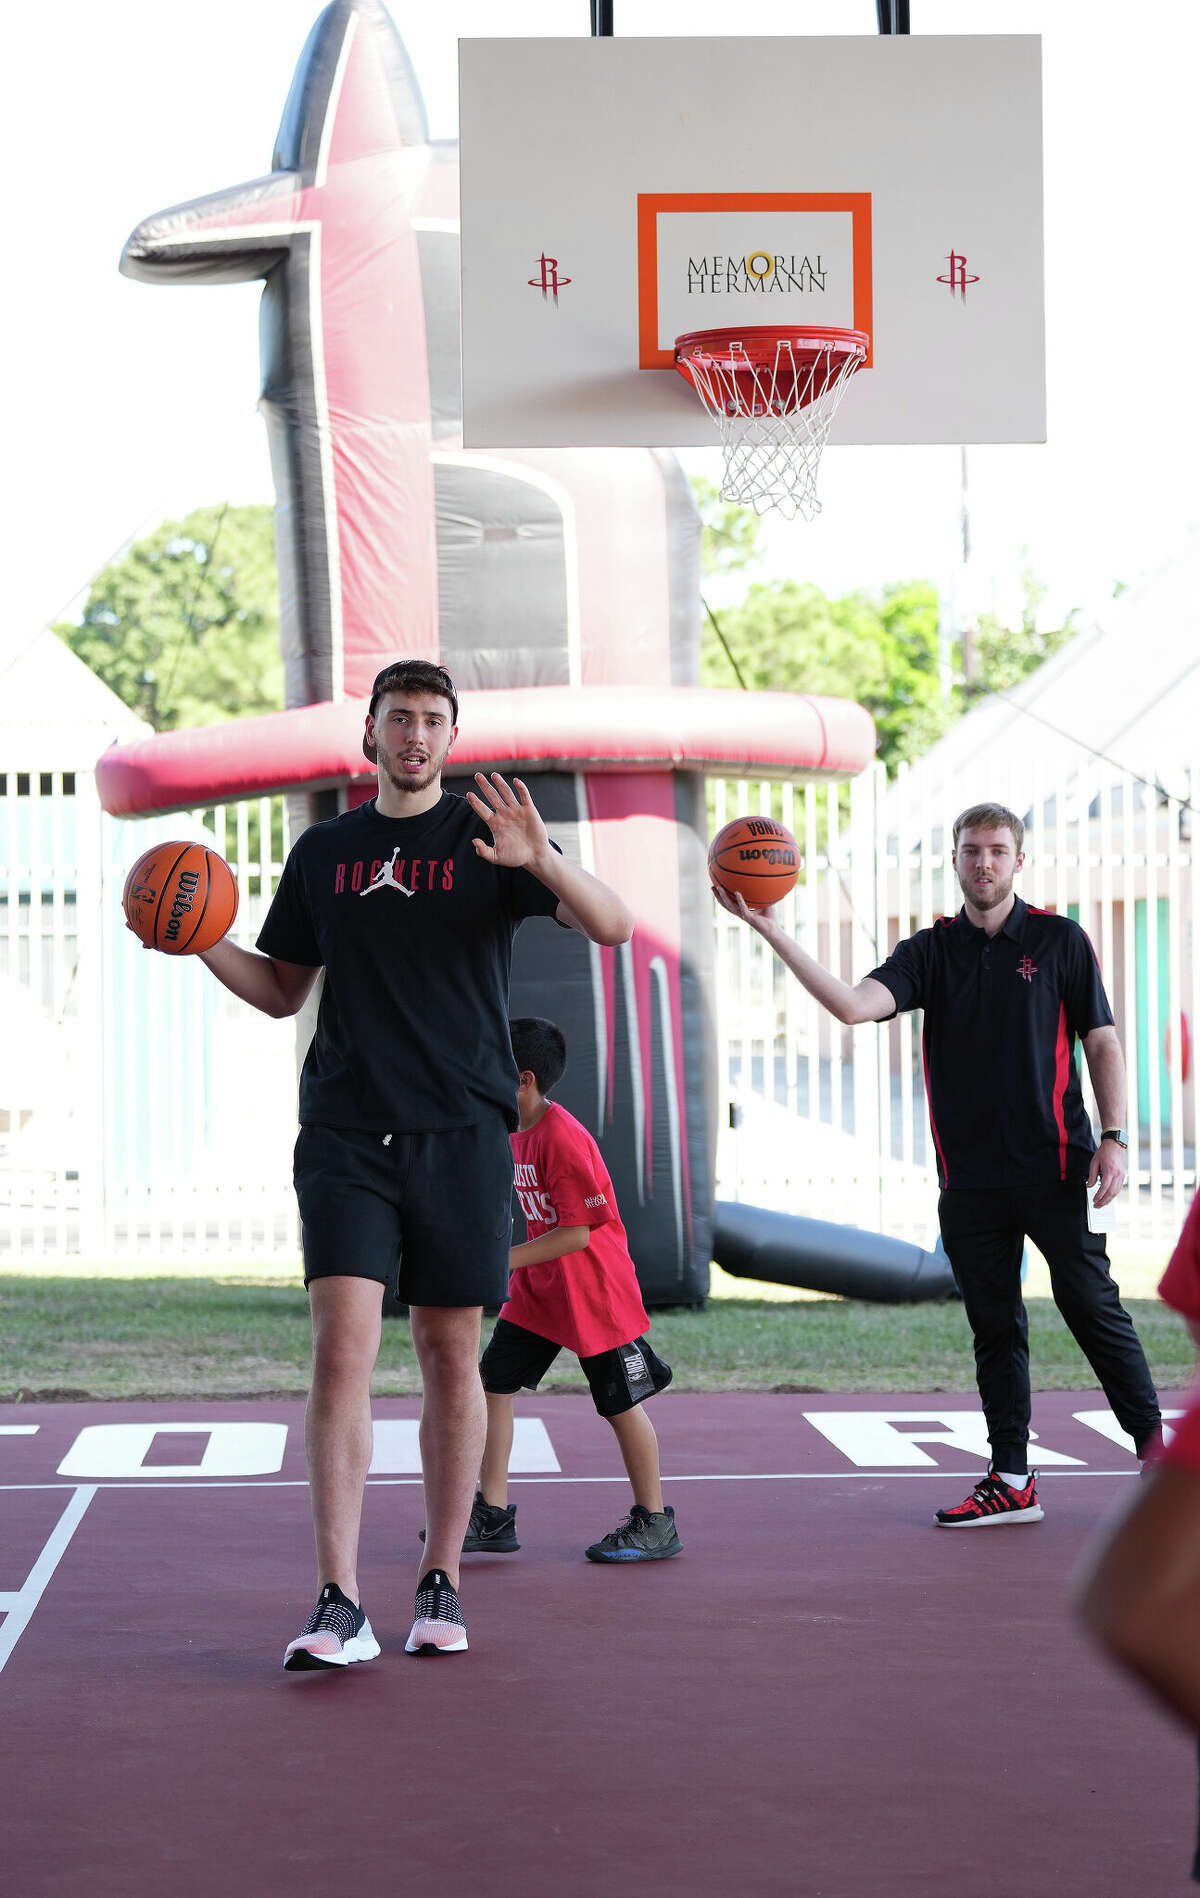 Houston Rockets center Alperen Sengun shoots hoops in the renovated outdoor basketball court during a ribbon cutting ceremony for renovations at Moody Community Center on Thursday, May 12, 2022 in Houston. The Houston Rockets and the Fertitta family along with Memorial Hermann pitched in to help spruce up the Moody Community Center.